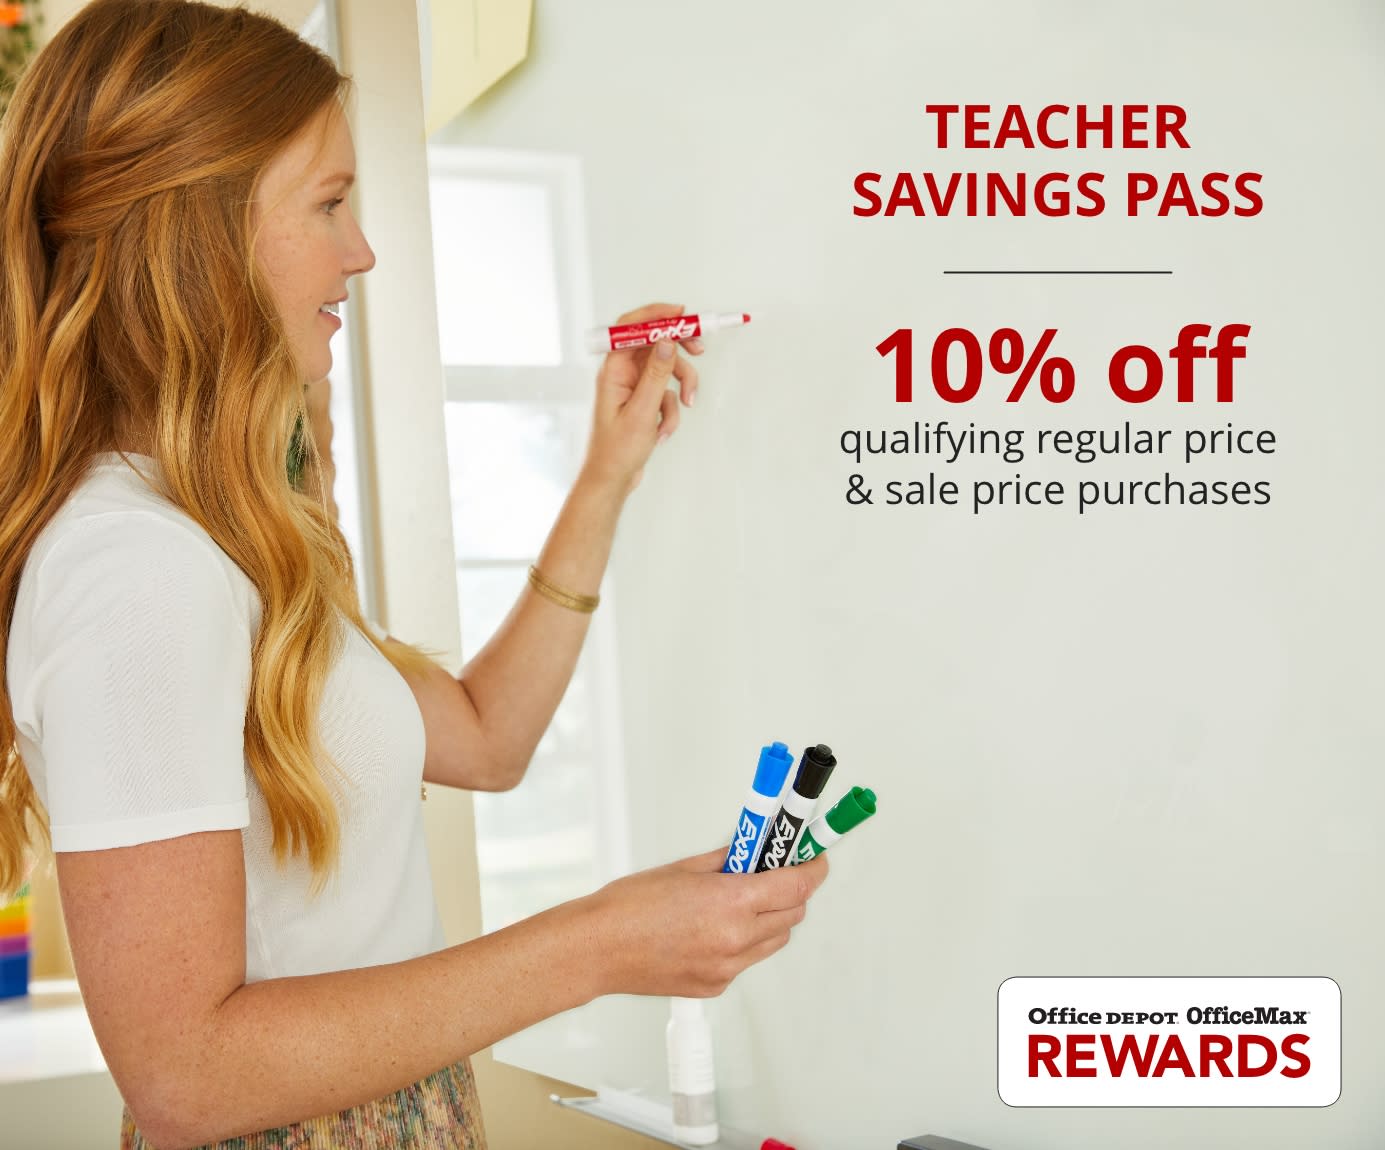 EXCLUSIVE TEACHER OFFER 30% Back in Bonus Rewards on your qualifying regularly priced purchase. In store only.